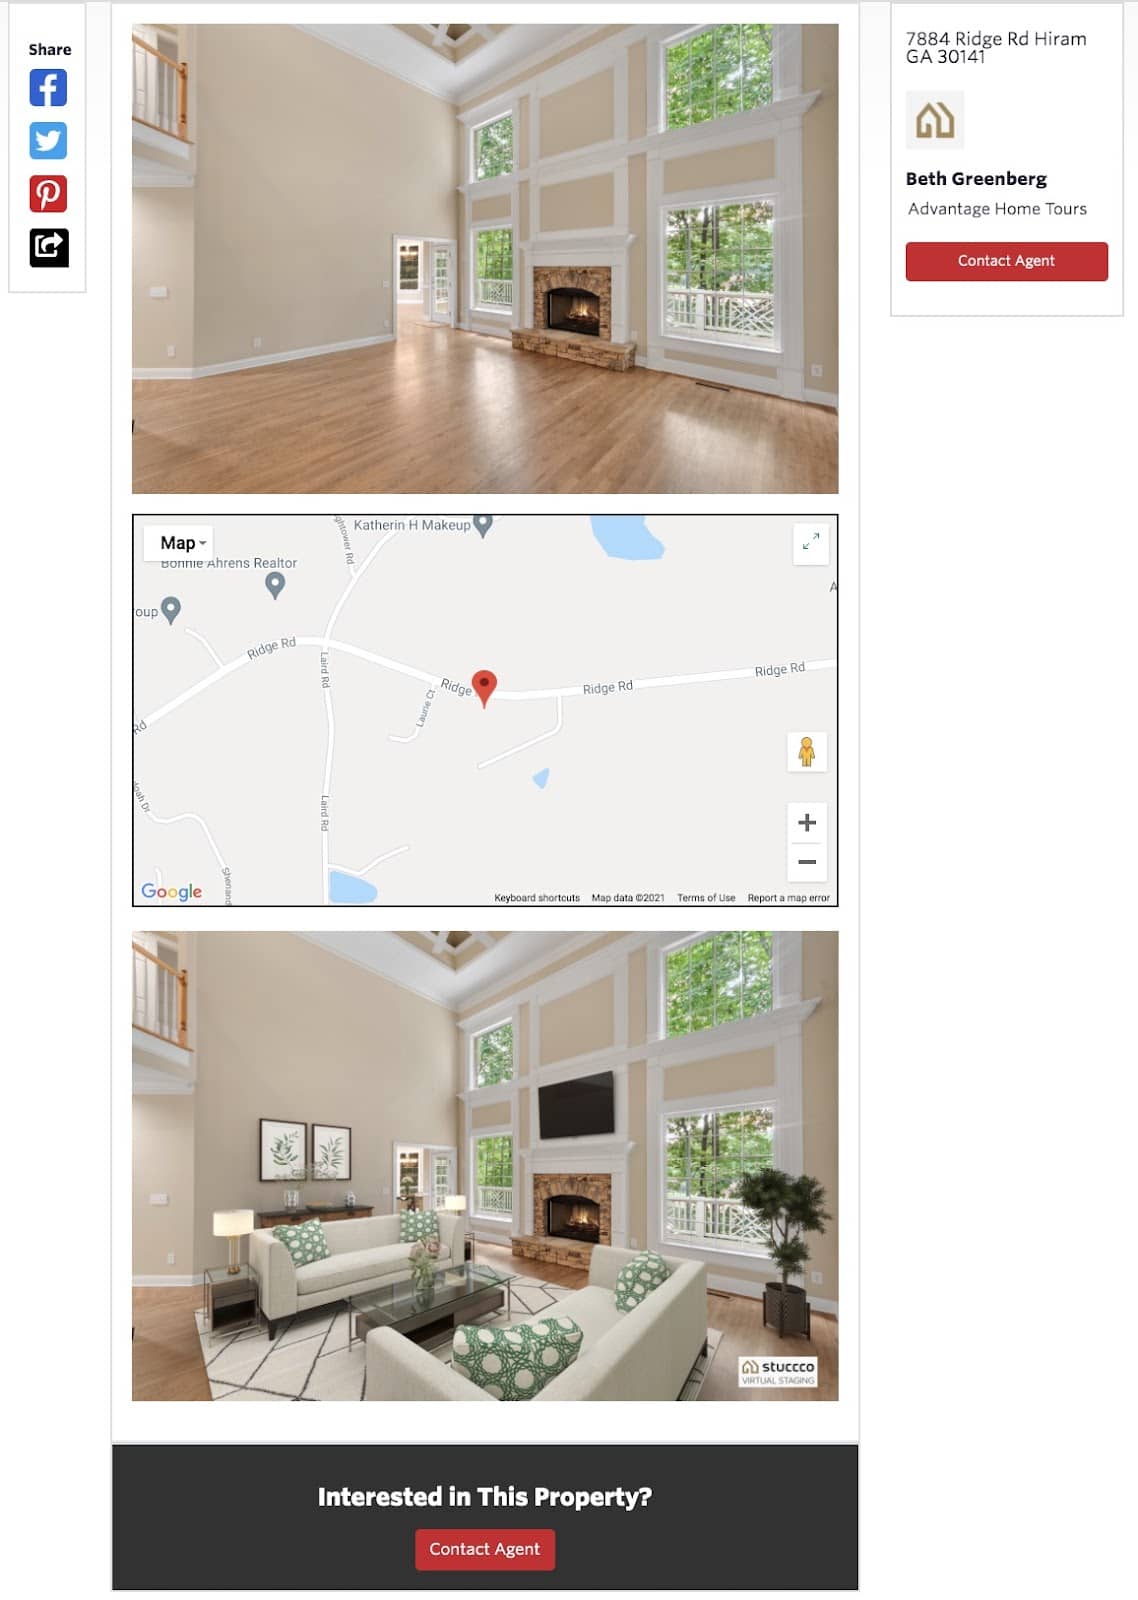 Sample single property website from Stuccco